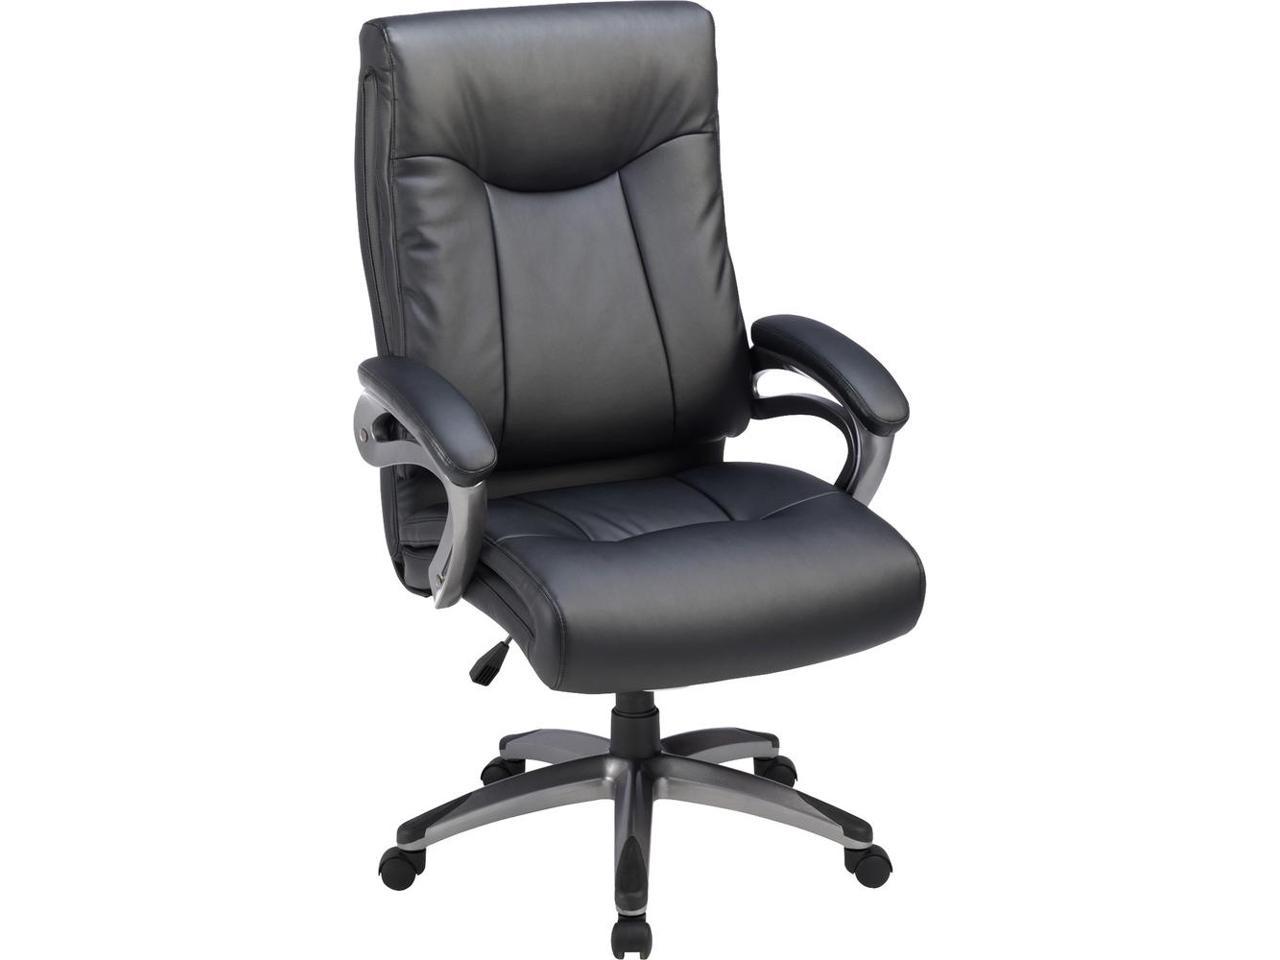 Lorell High-Back Exec Chair Leather 27"x30"x46-1/2" BK 69516 - image 4 of 7